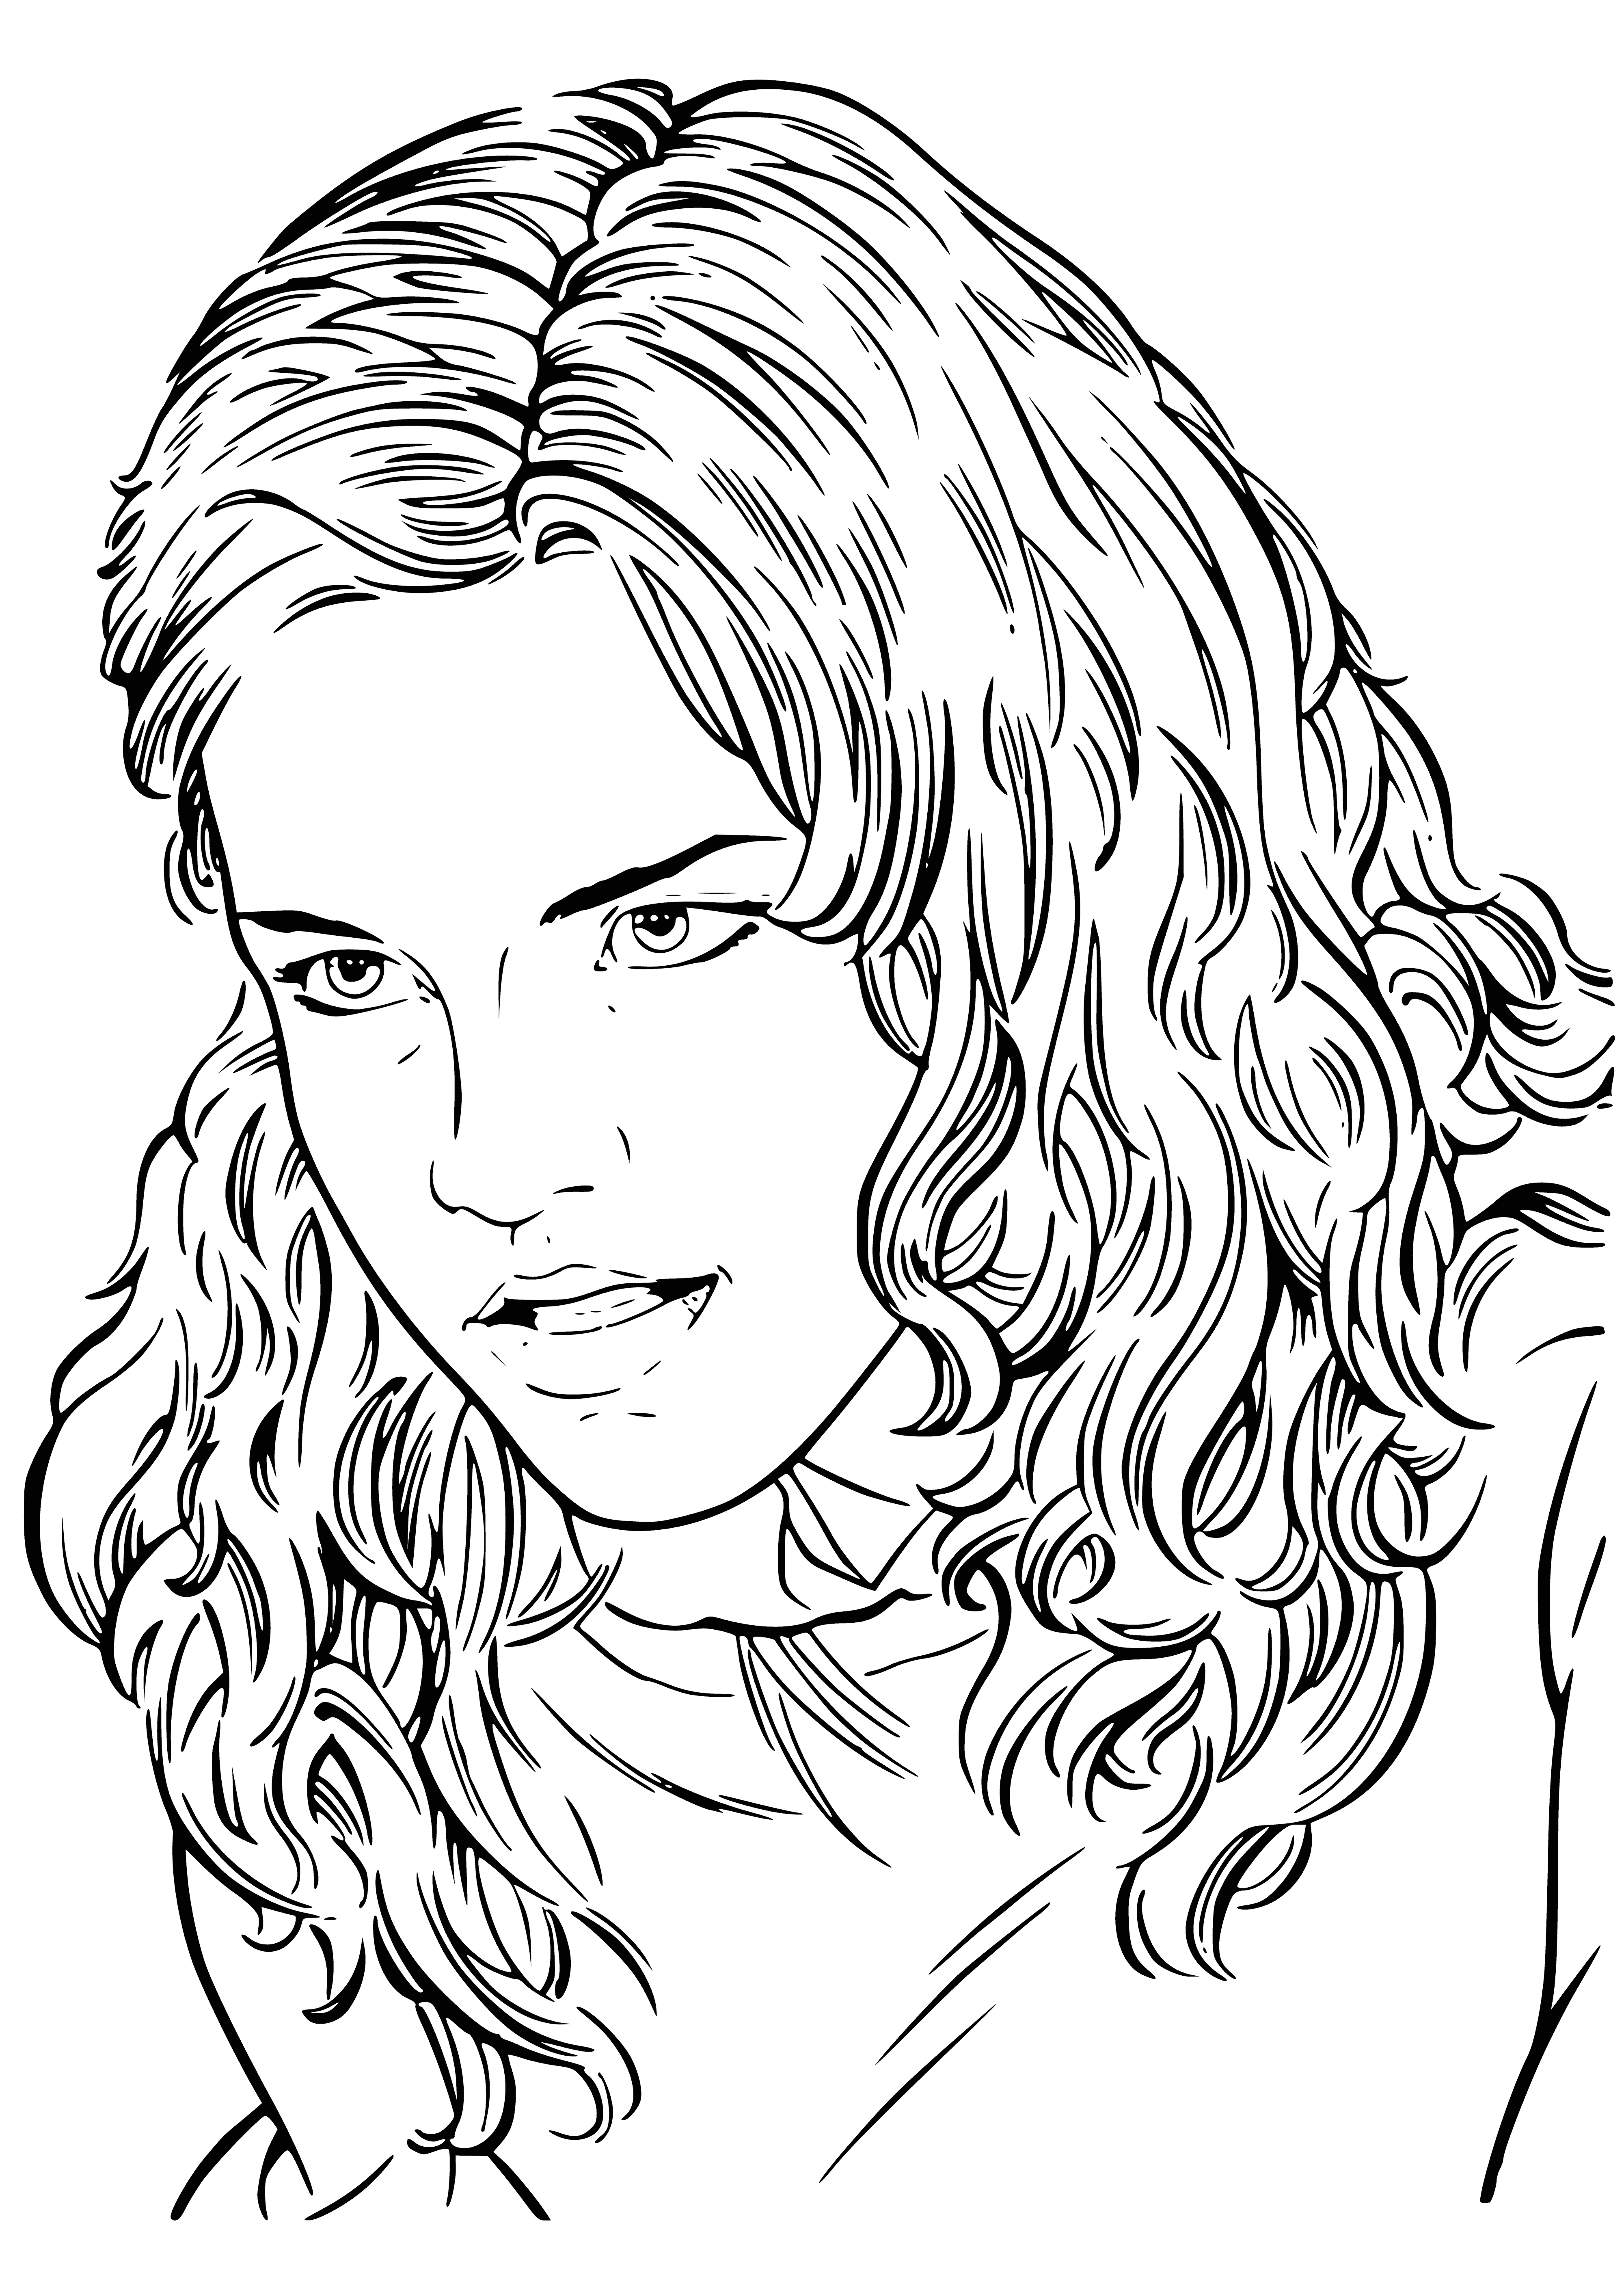 coloring page: Hermione is a brilliant student and strong-willed friend to Harry; she is a foil to him, being logical where he is emotional.